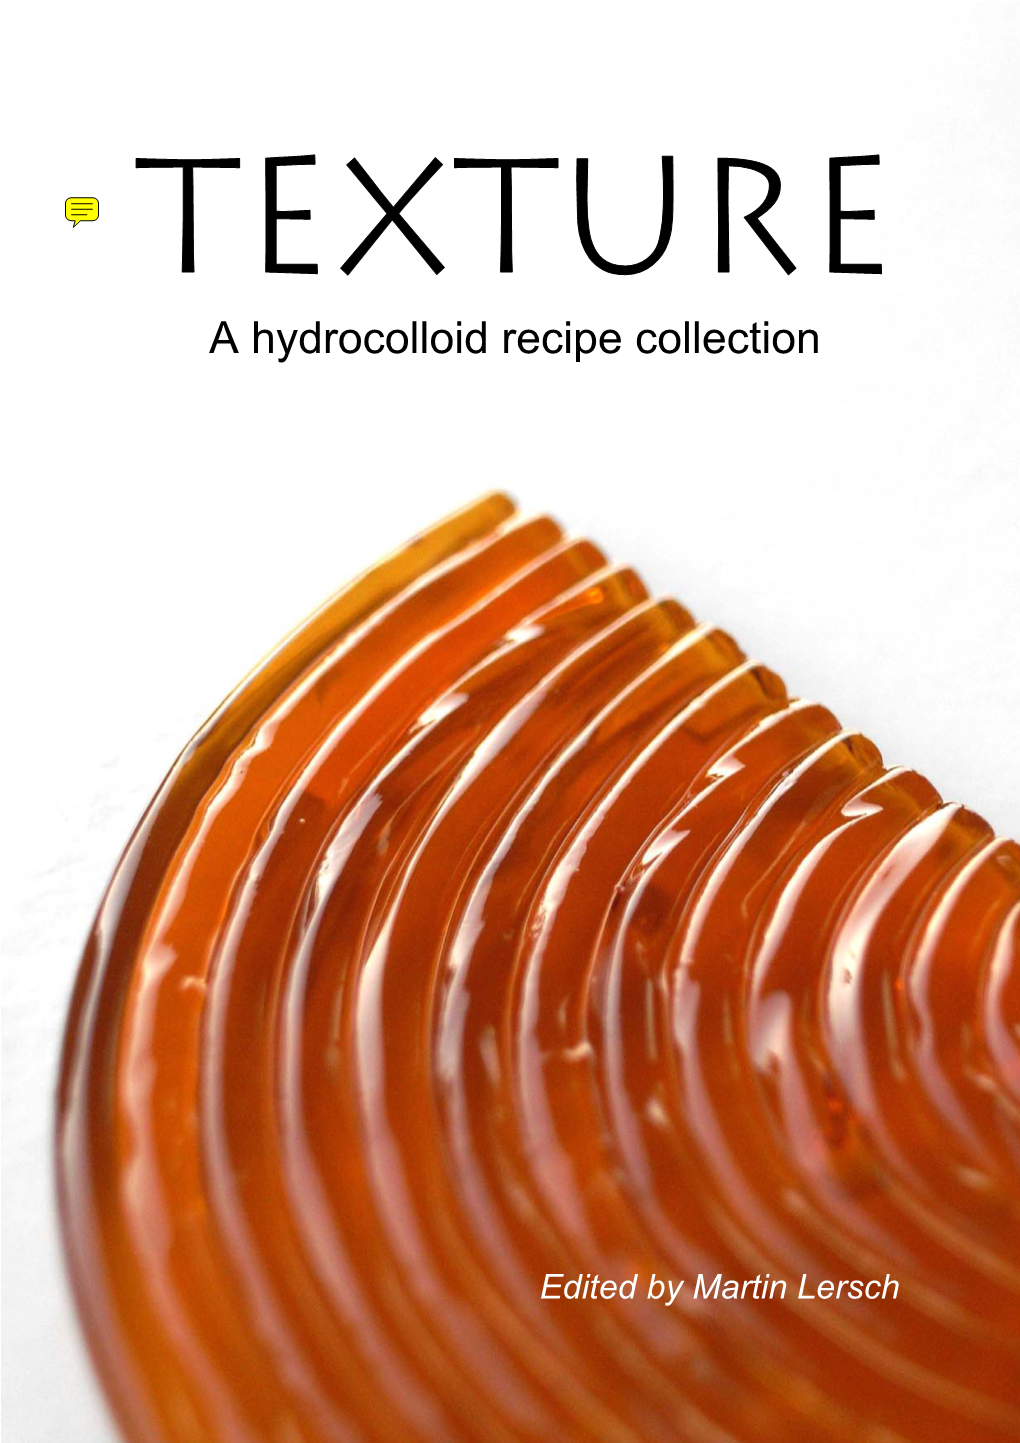 Texture – a Hydrocolloid Recipe Collection, V.2.1 (June 2008) Available for Free Download from And